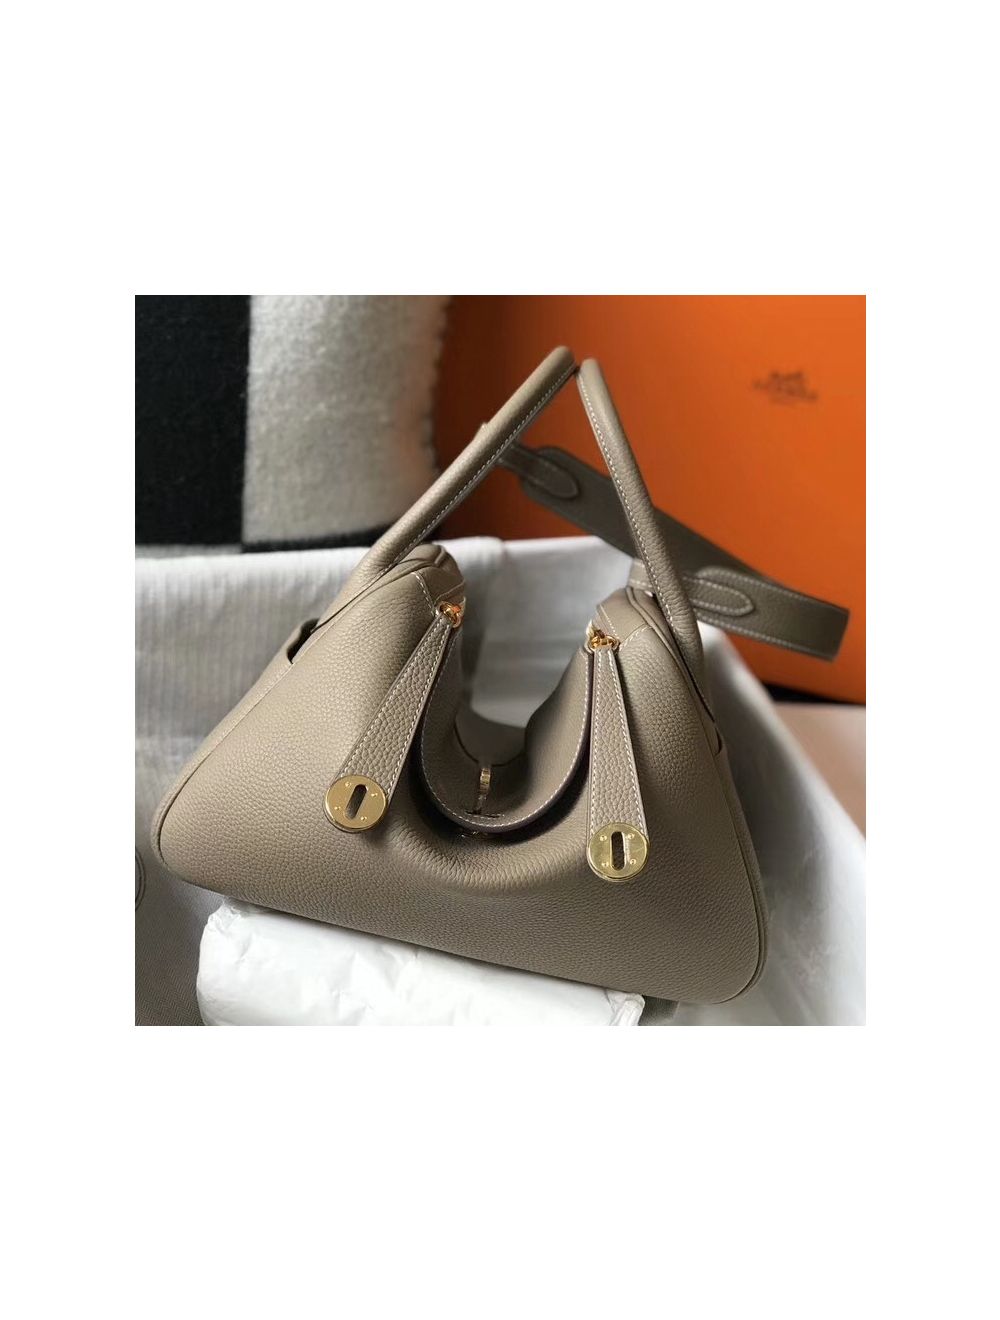 Hermès Lindy 30 Etain Clemence GHW from 100% authentic materials!